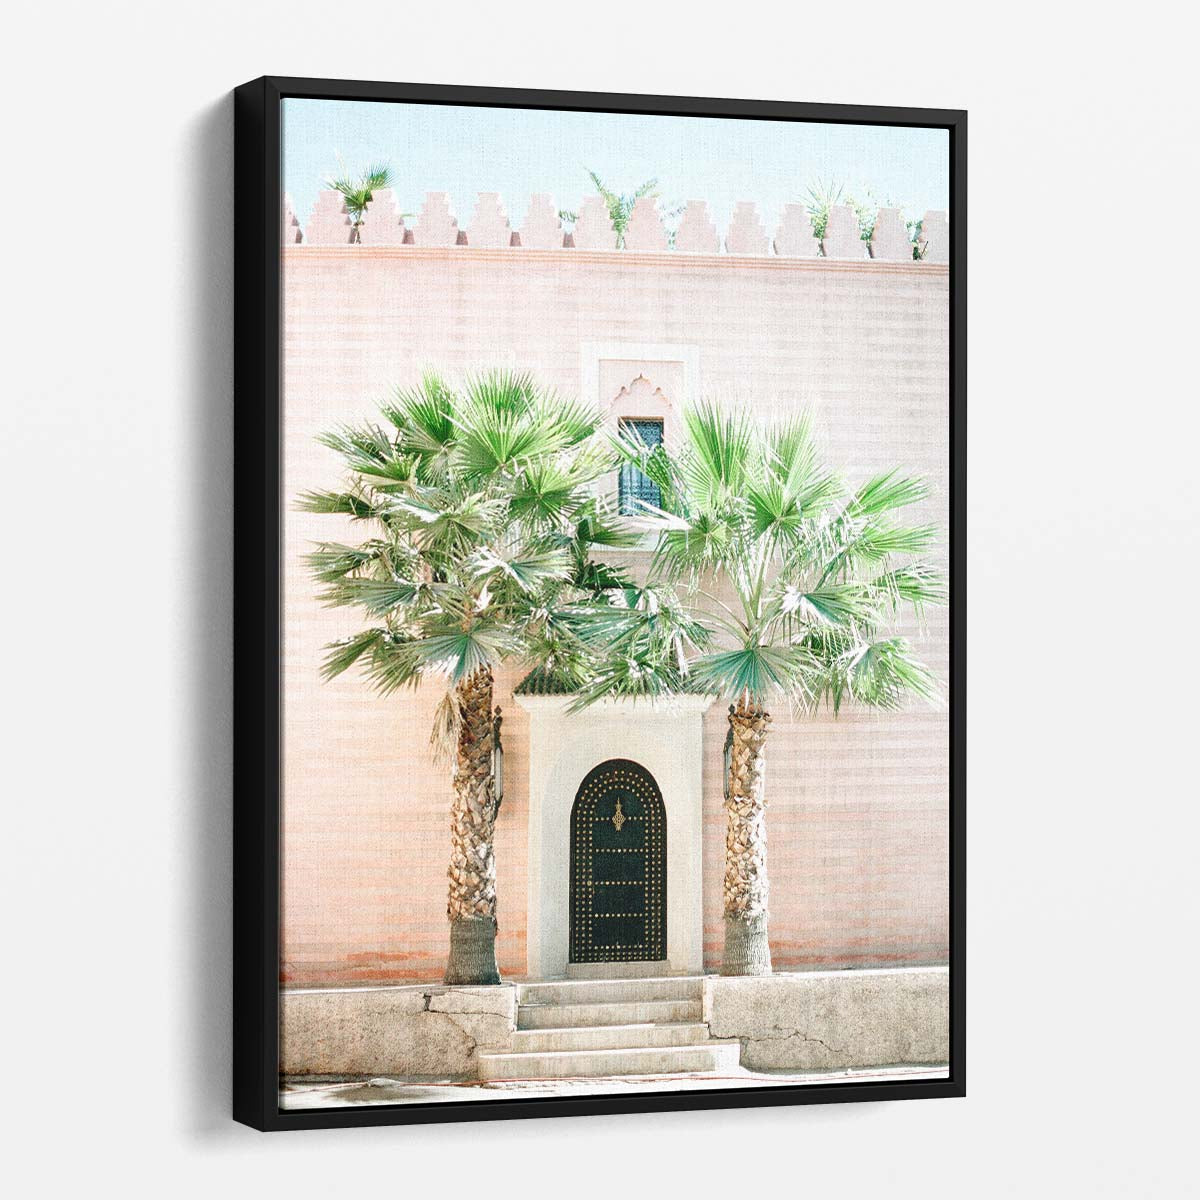 Exotic Marrakesh Architecture Photography Sunny Palm Tree Doorways by Luxuriance Designs, made in USA